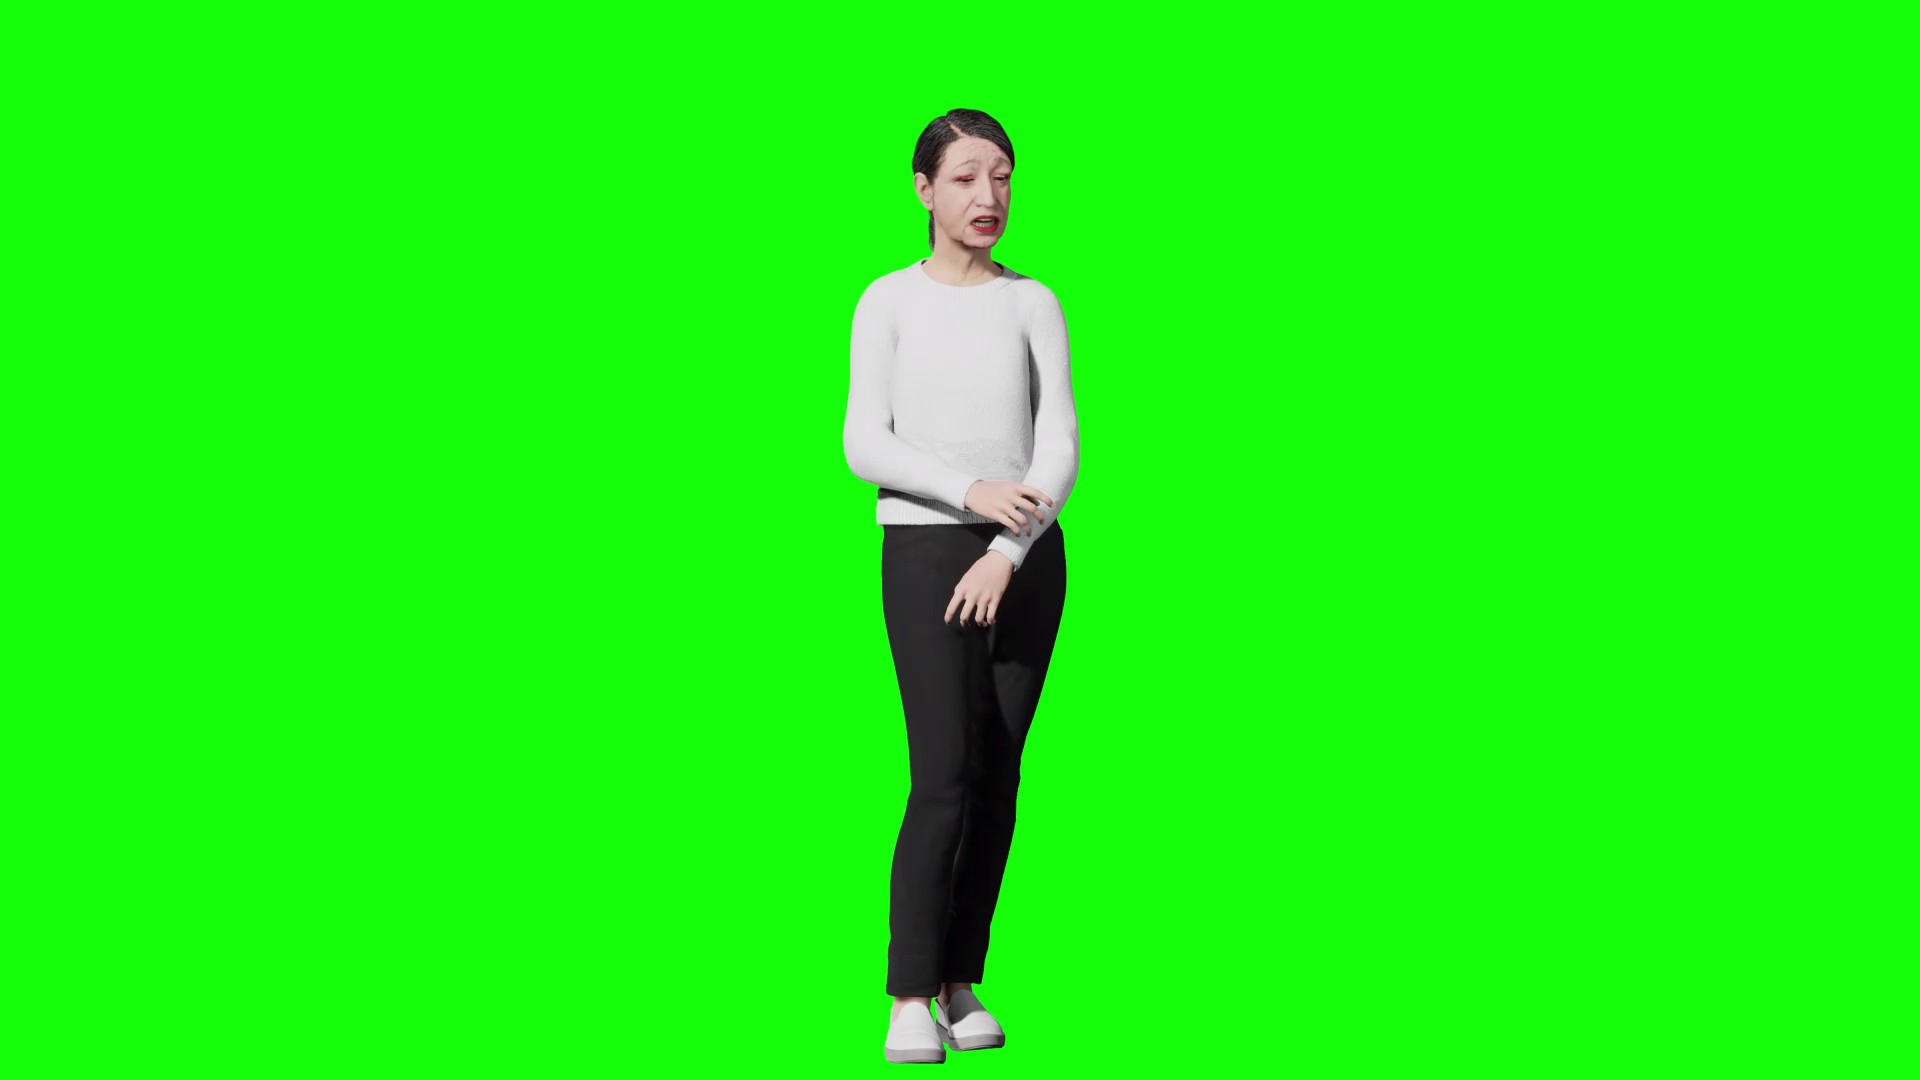 Grandma singing an old song on a green screen